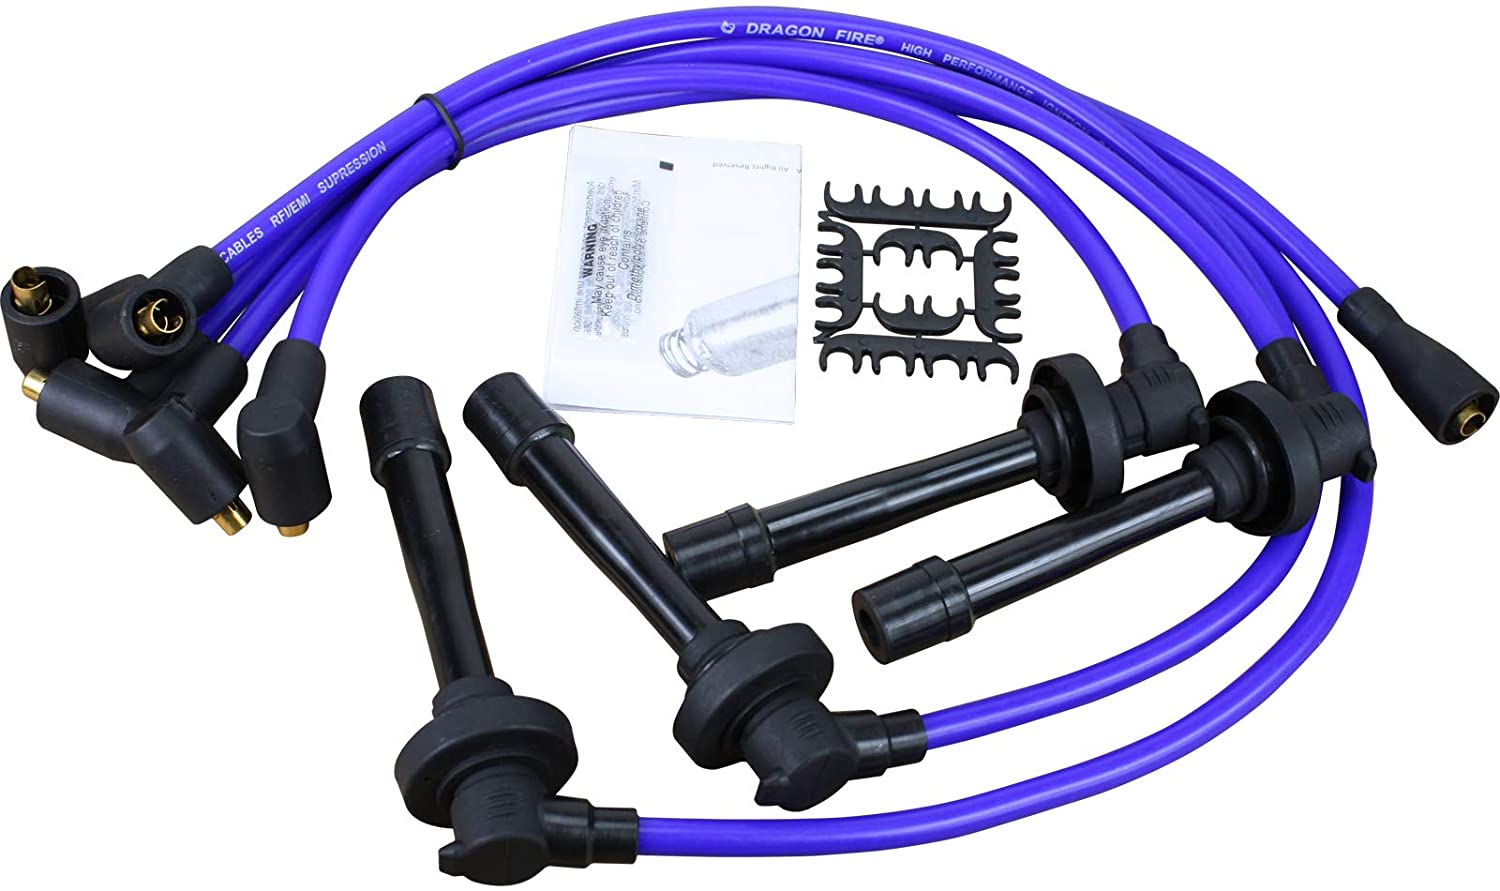 Dragon Fire Retro Series Purple High Performance Ignition Spark Plug Wire Set For All 1992-2002 Honda 4 Cylinders 1.5L 1.6L 1.8L Oem Fit PWTD-DF-P